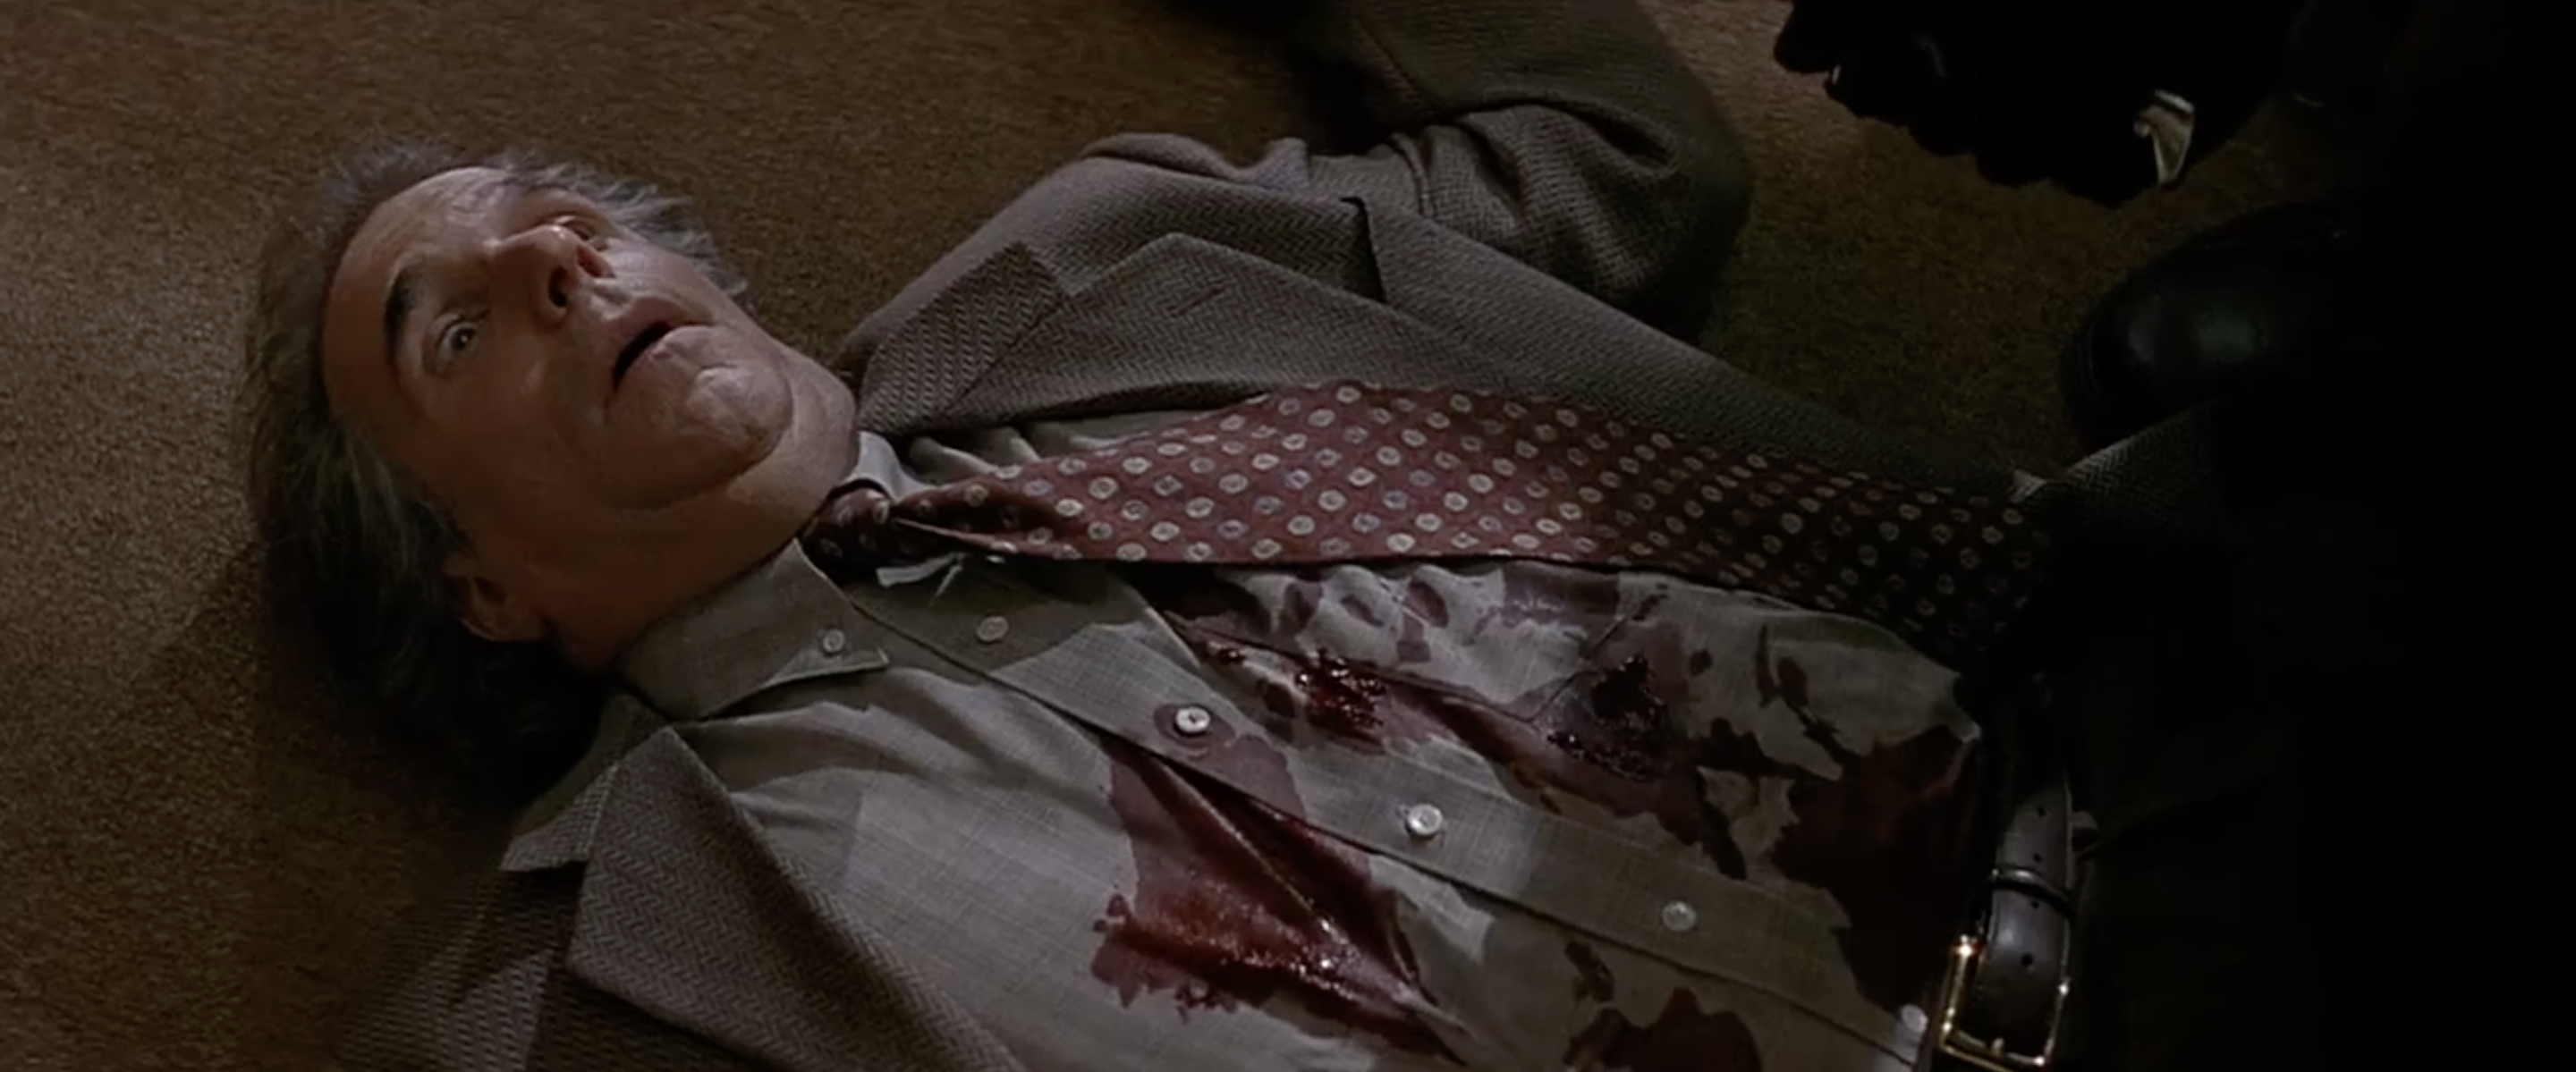 Winkler lying on the ground with a bloody shirt and eyes open